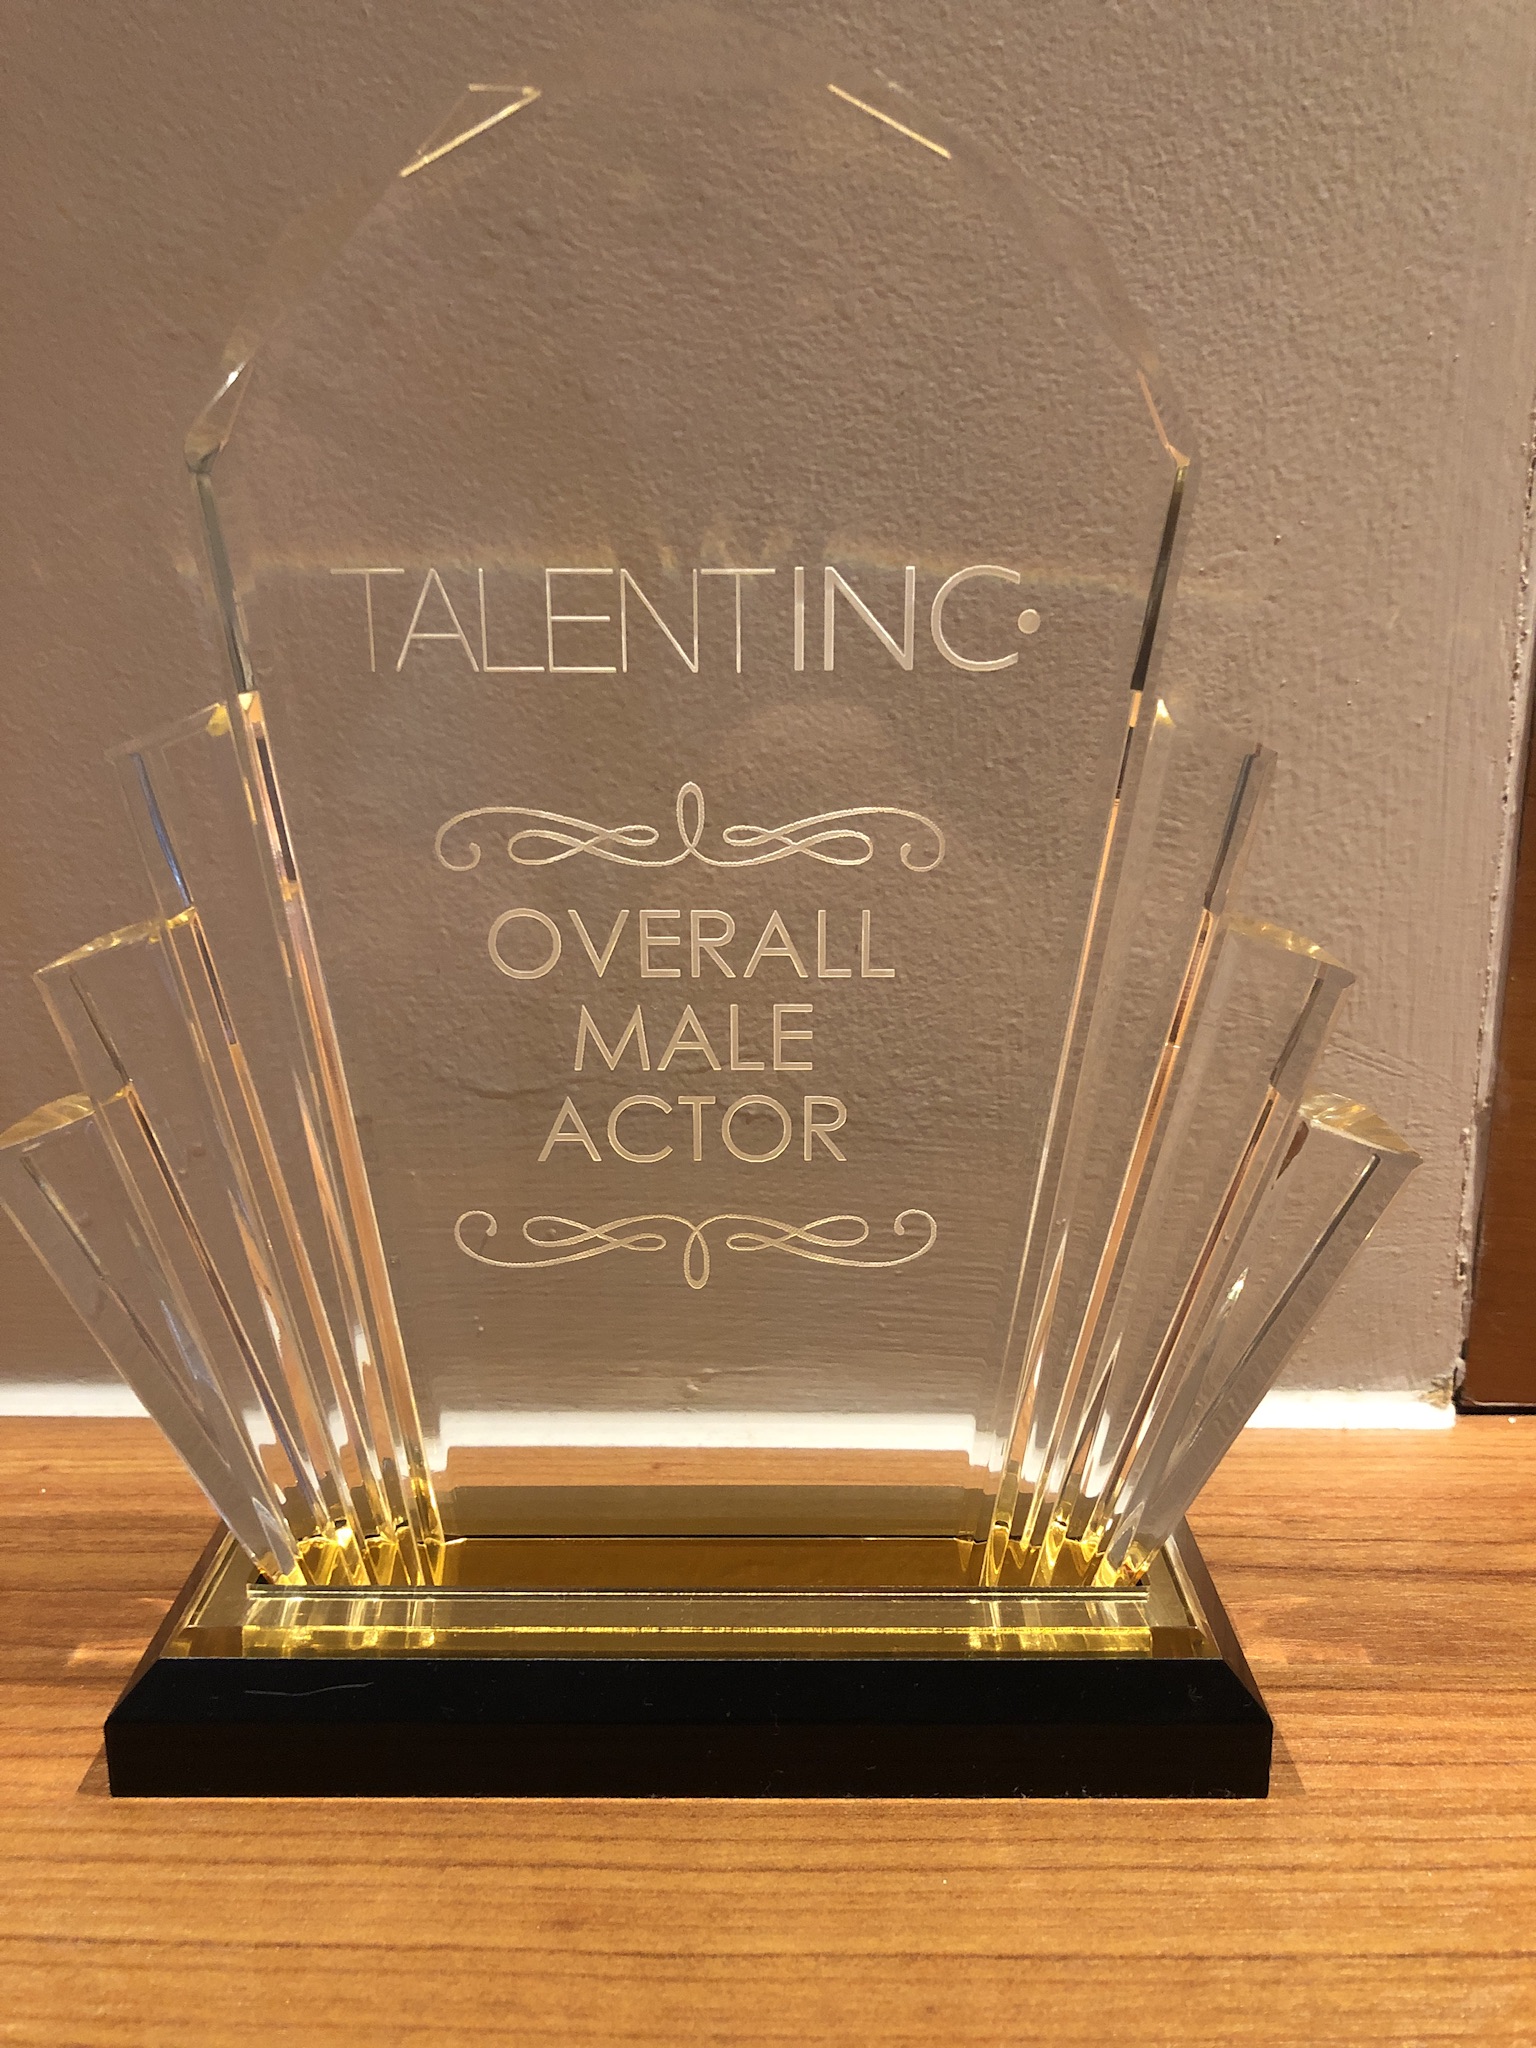 Overall best male actor - Talent inc showcase 